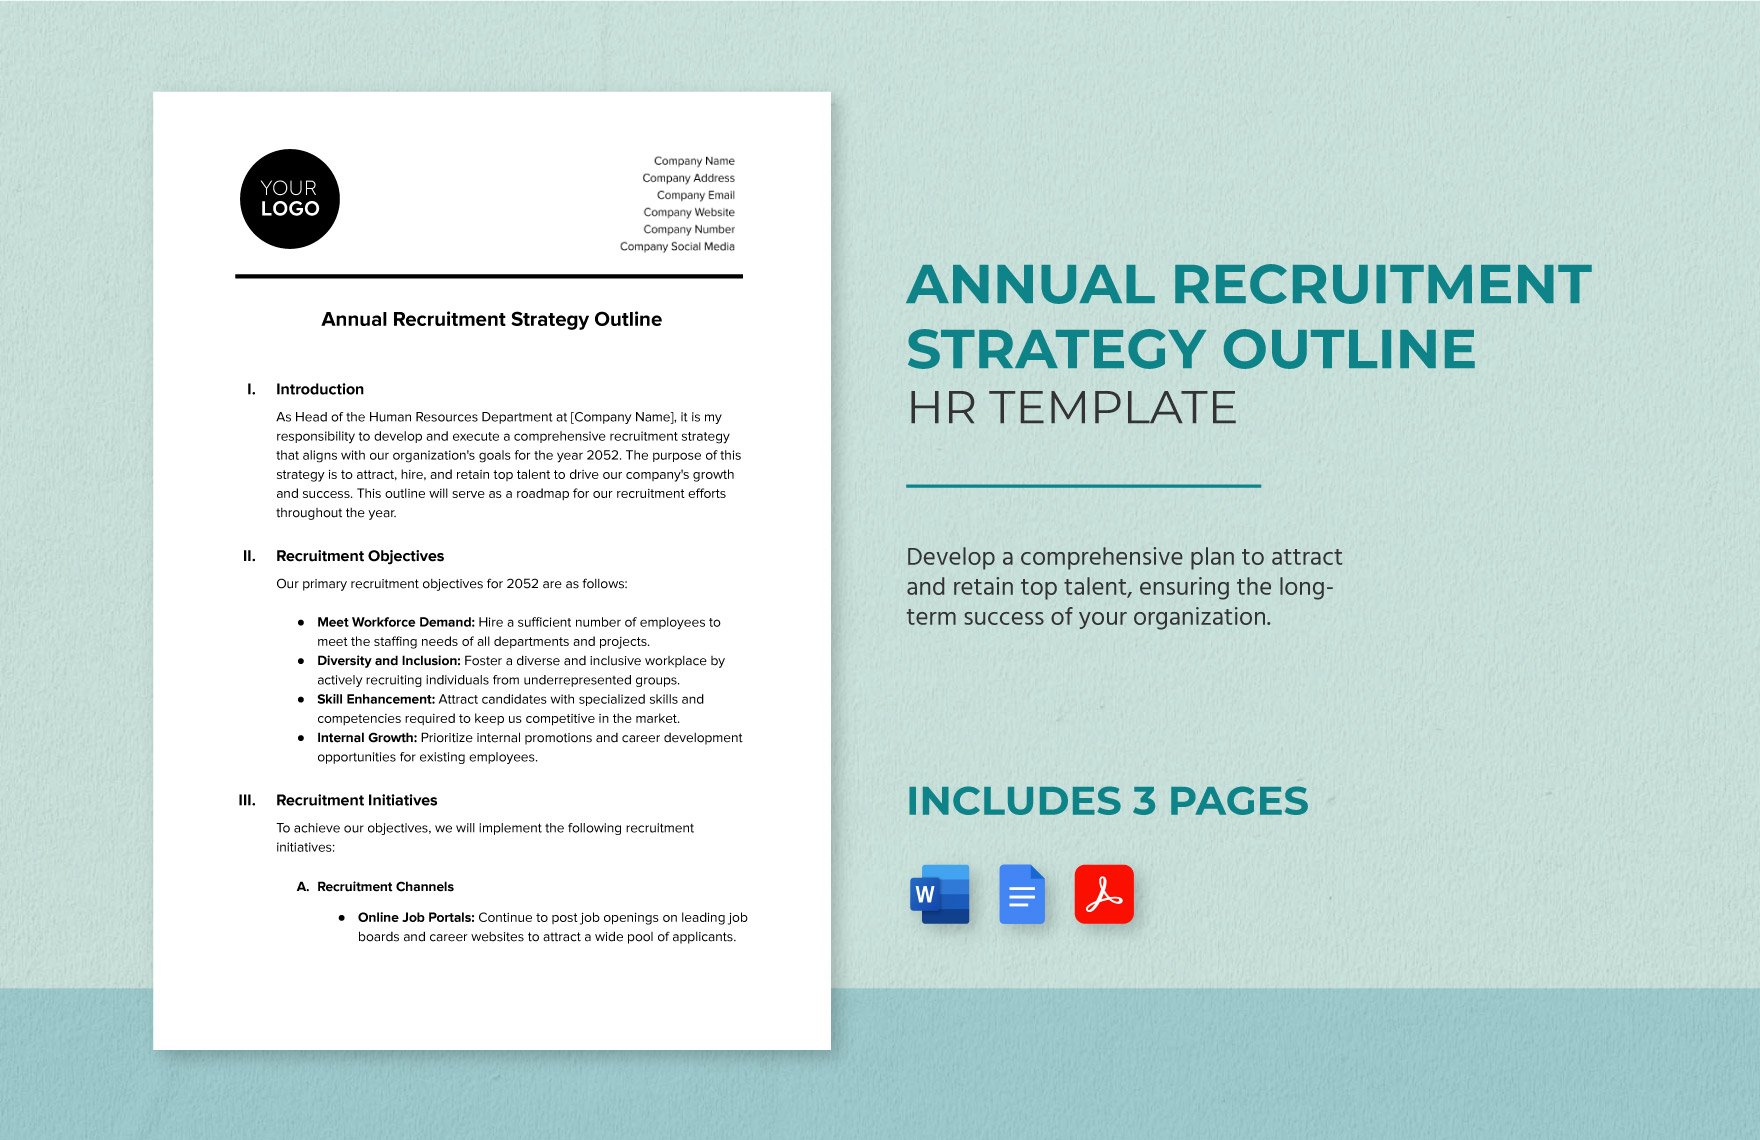 Annual Recruitment Strategy Outline HR Template in Word, Google Docs, PDF